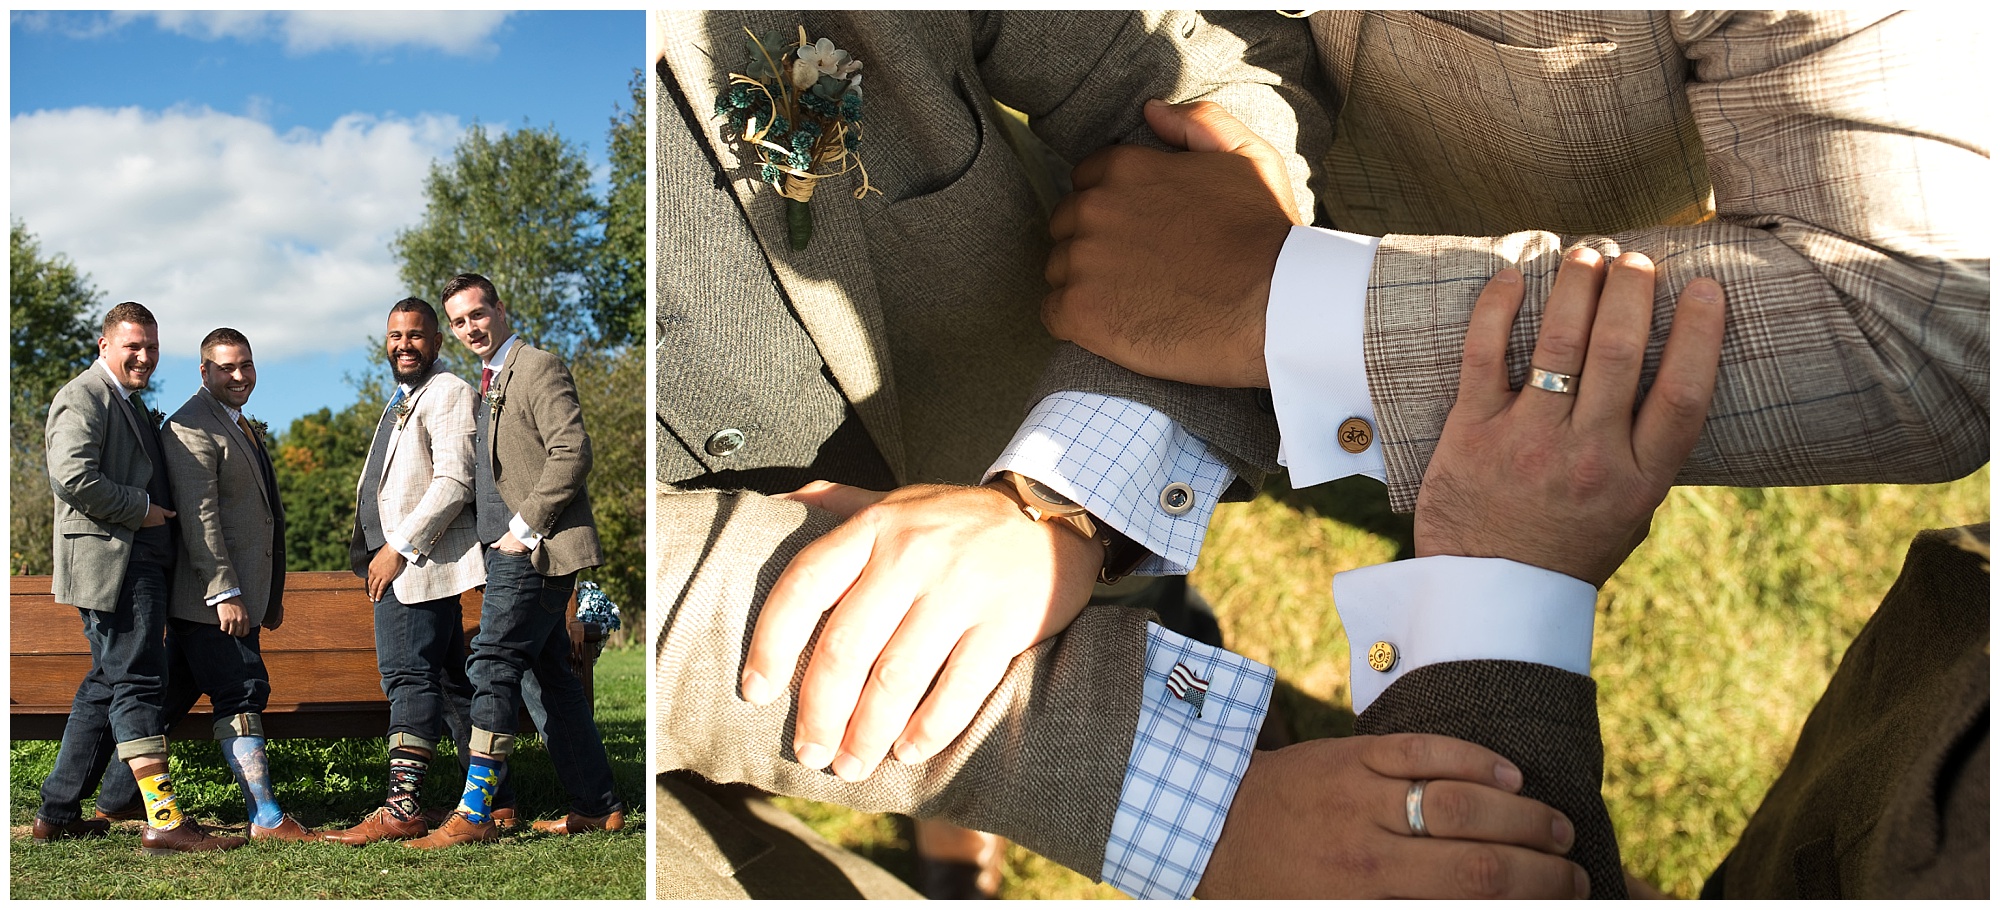 The groom and groomsmen showing off their cuff links